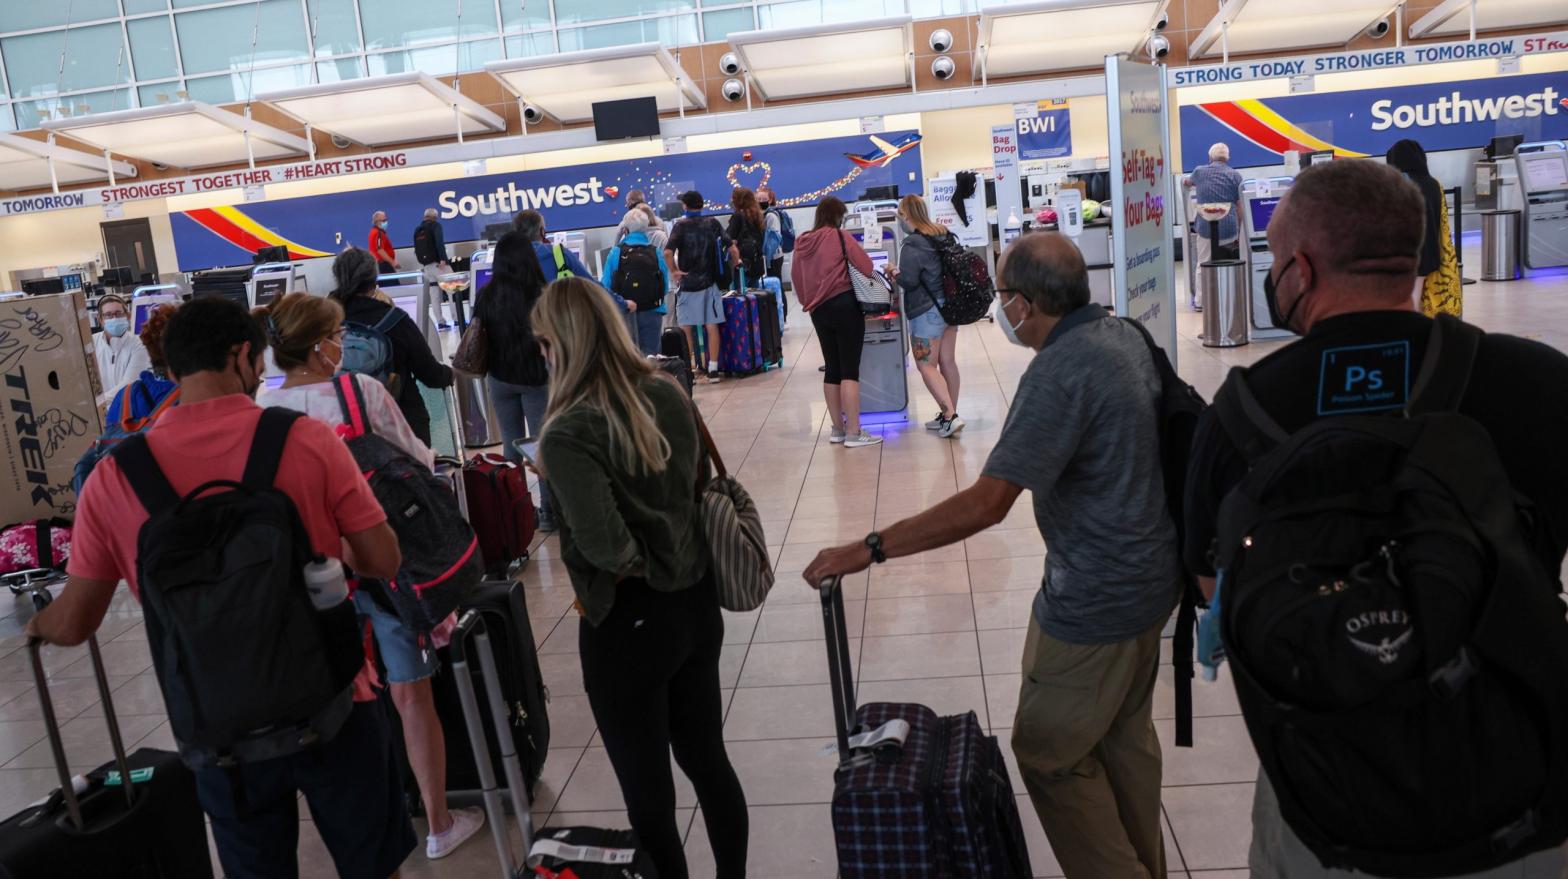 Southwest Airlines travellers wait at the check-in counter at Baltimore Washington International Thurgood Marshall Airport on Oct. 11, 2021, among widespread cancellations and delays that are definitively not about Joe Biden's vaccine policies. (Photo: Kevin Dietsch, Getty Images)